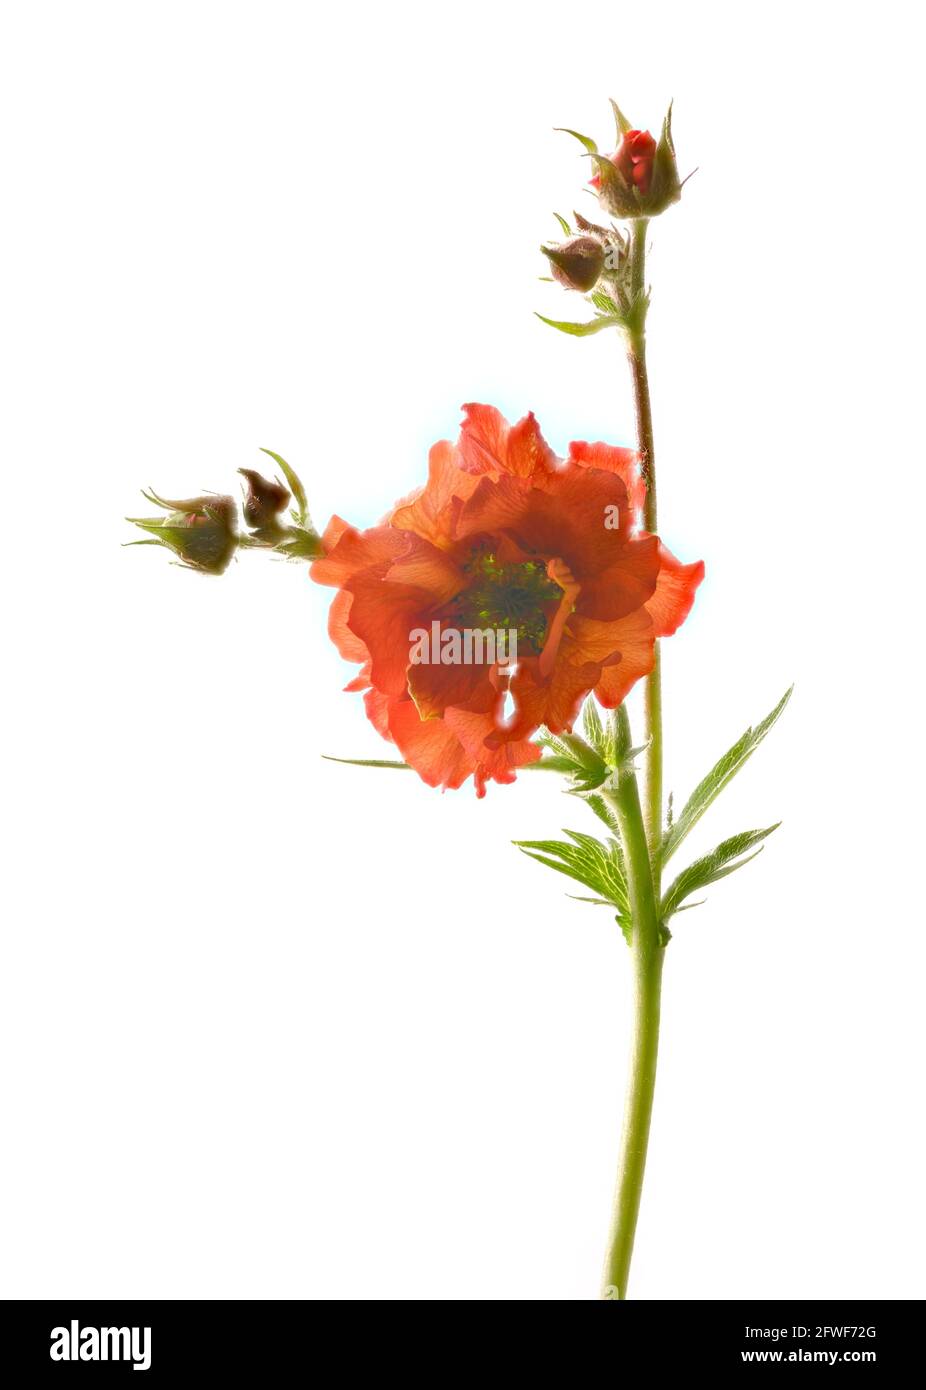 Beautiful bright red Geum flower (Rosaceae species) photographed against a plain white background Stock Photo